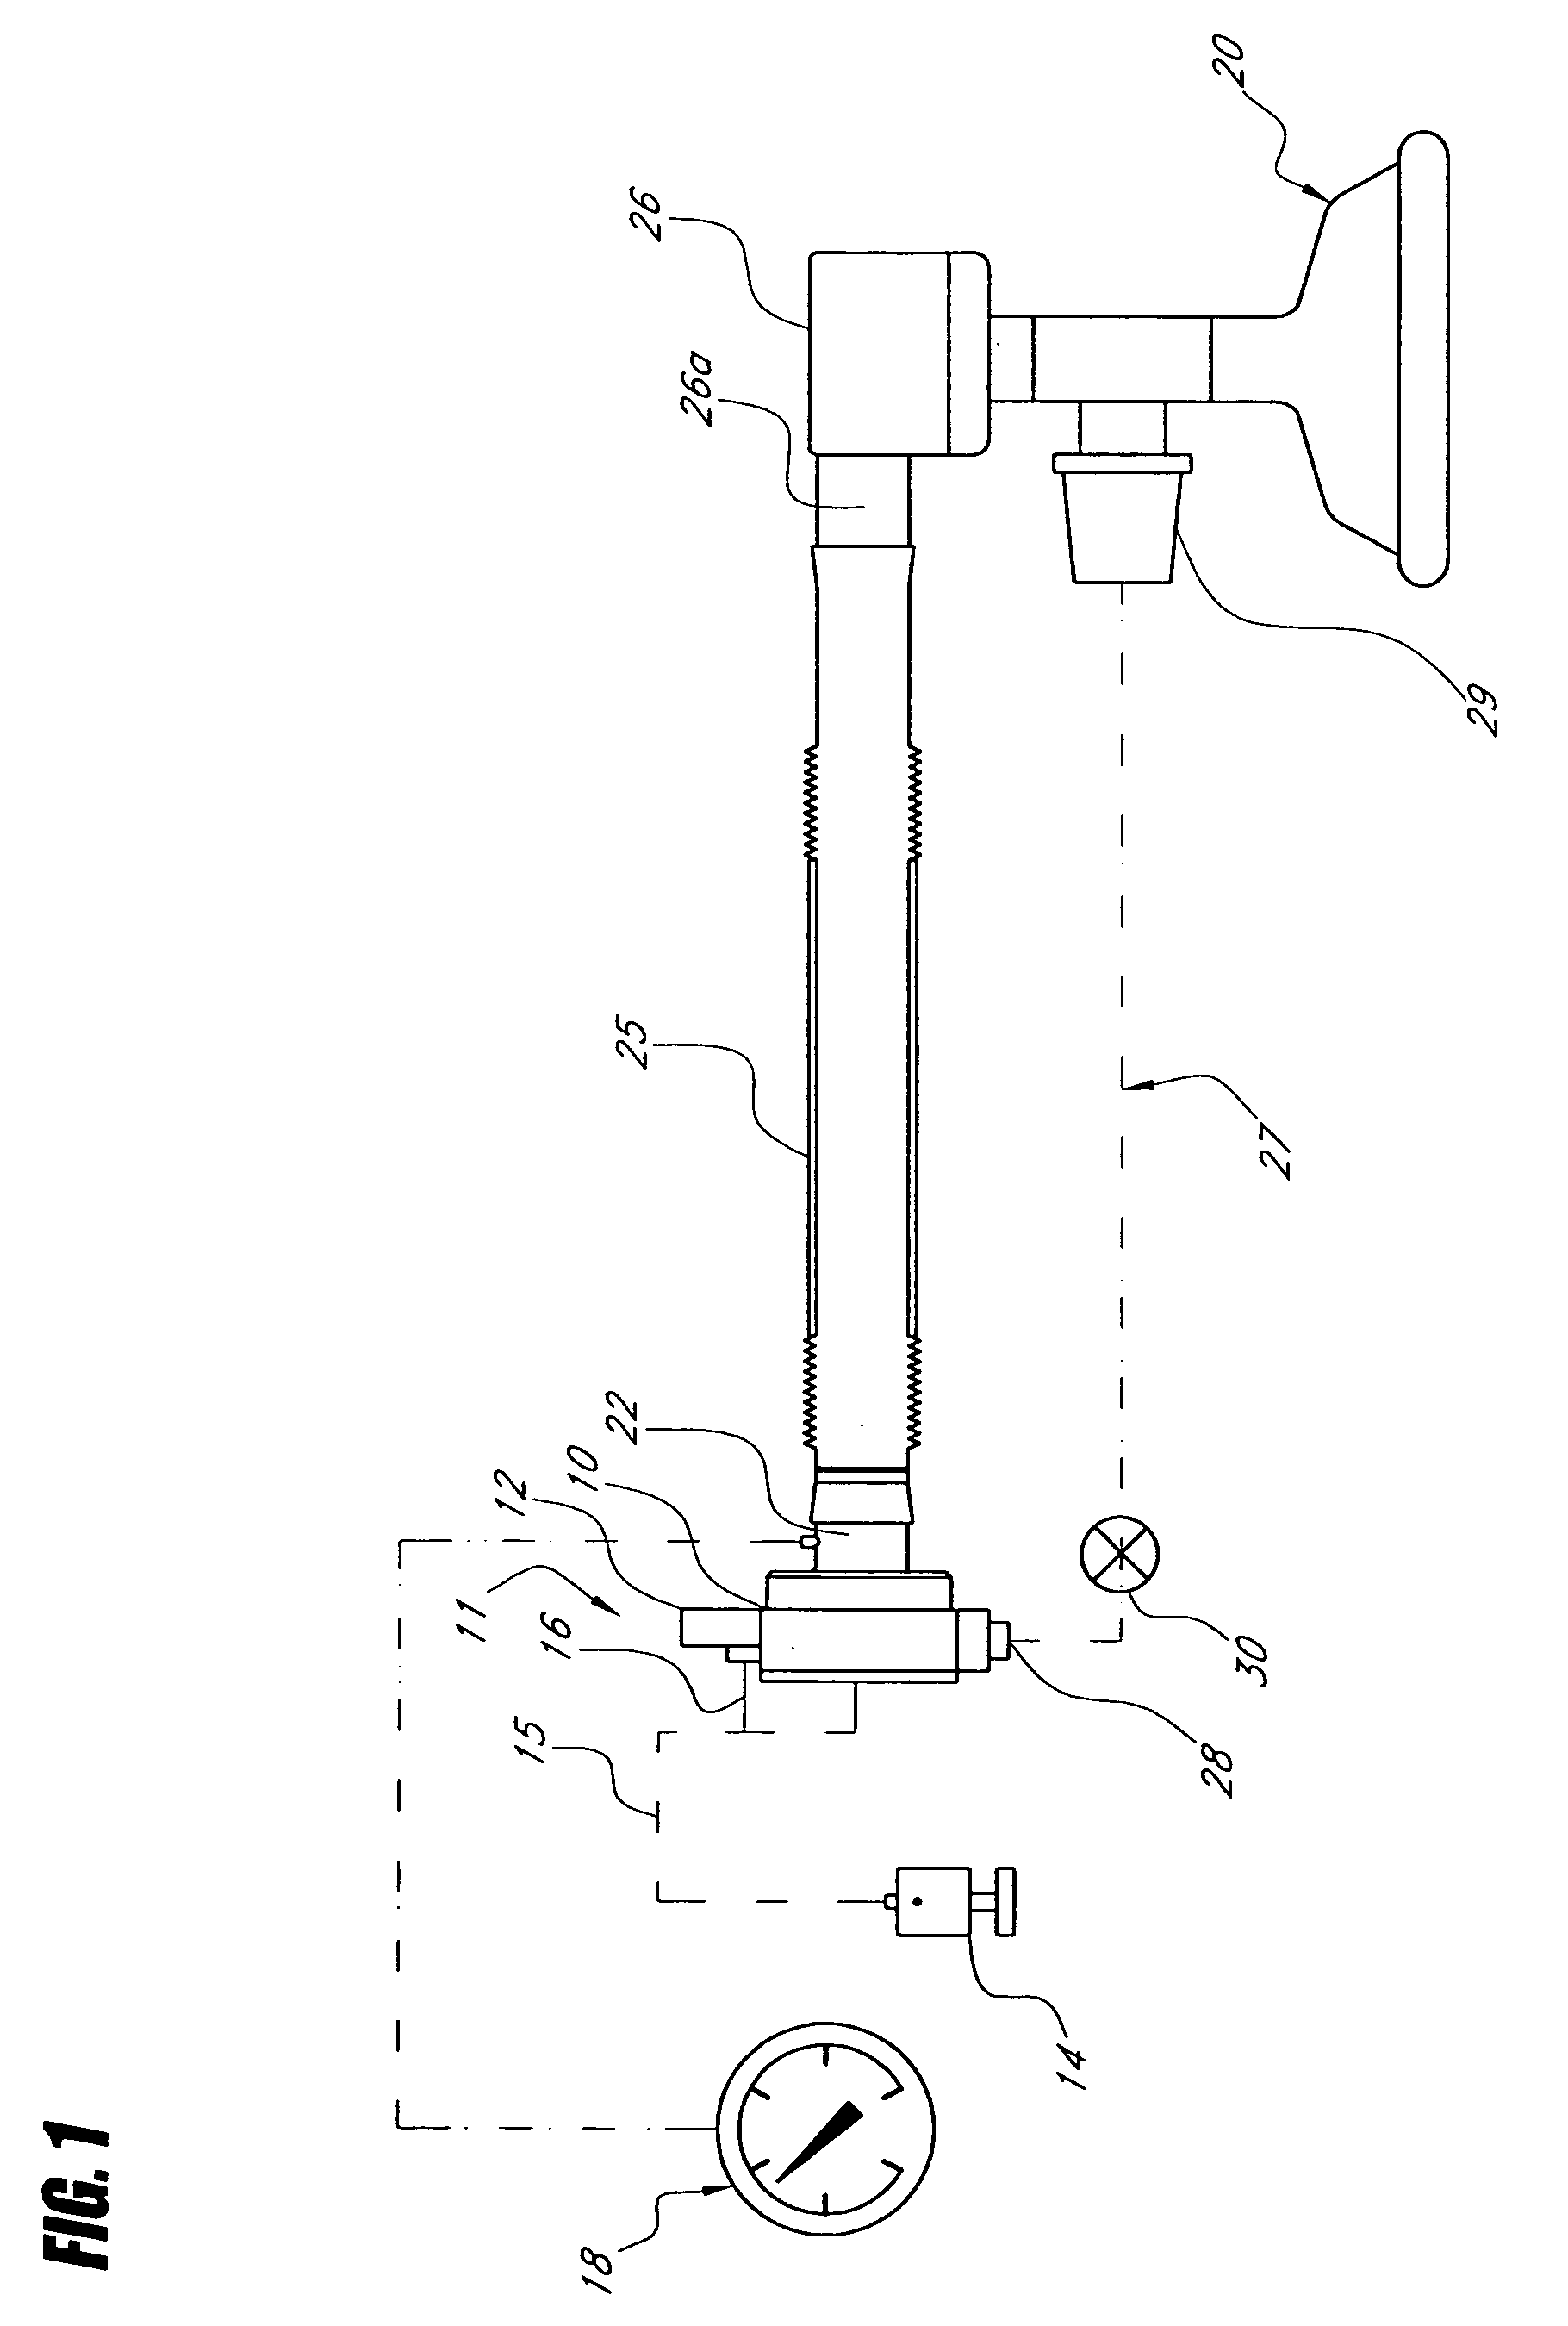 Portable gas powered positive pressure breathing apparatus and method